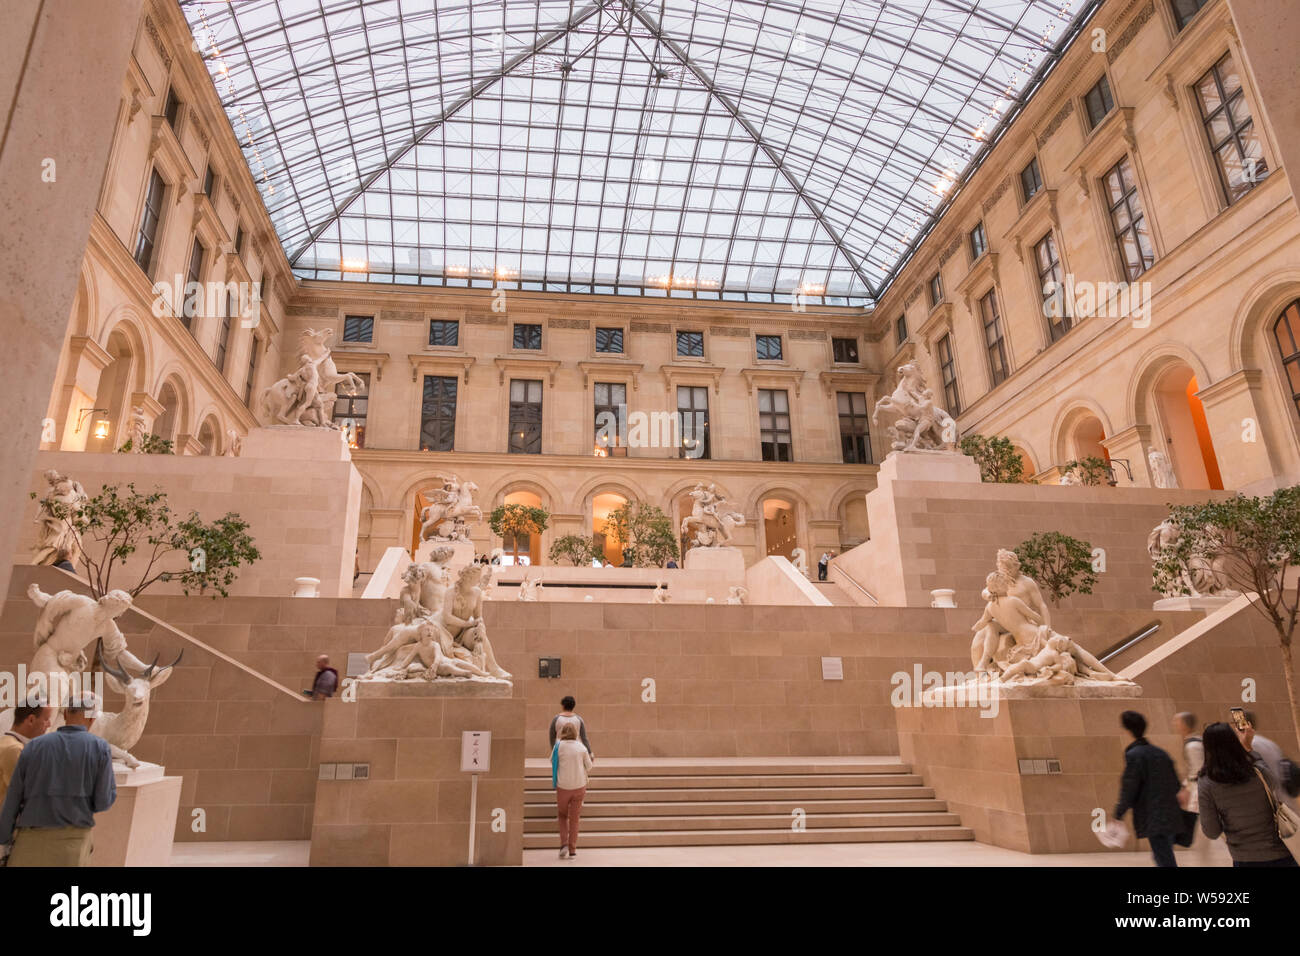 Panoramic low-angle view of the indoor sculpture garden Cour Marly in the Louvre’s Richelieu Wing. Visitors in the glass-roofed courtyard can admire... Stock Photo